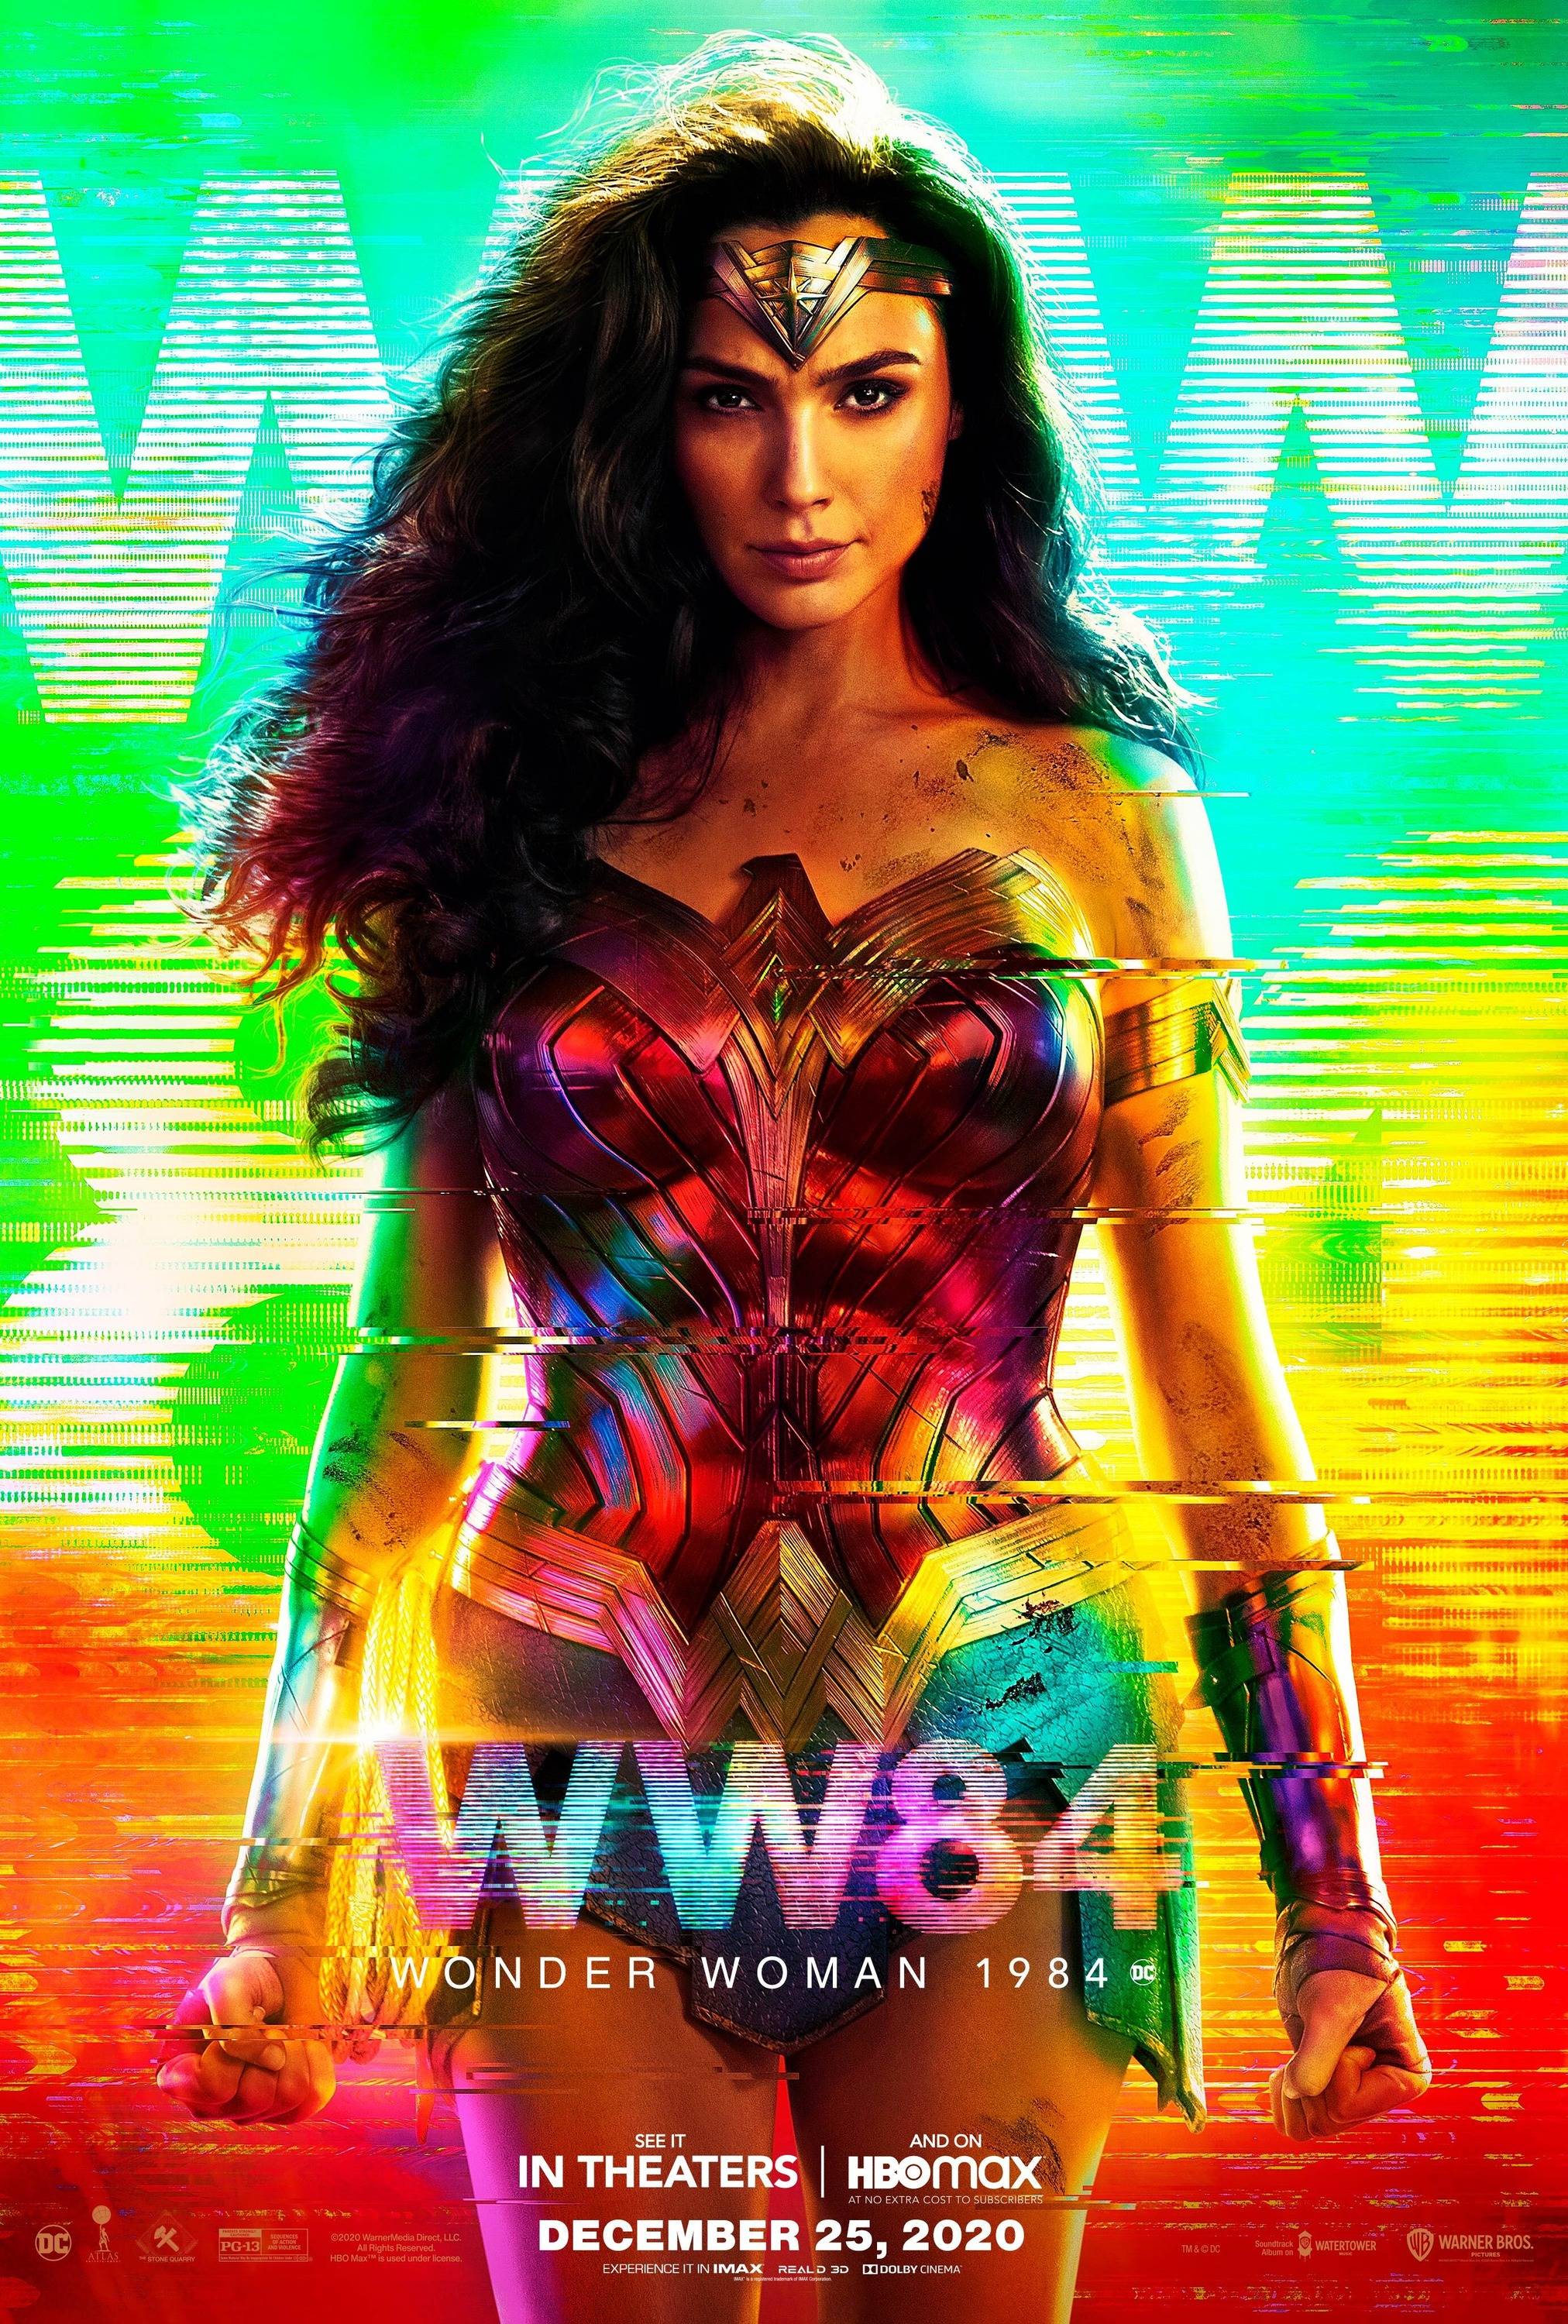 how long will wonder woman 84 be on hbo max